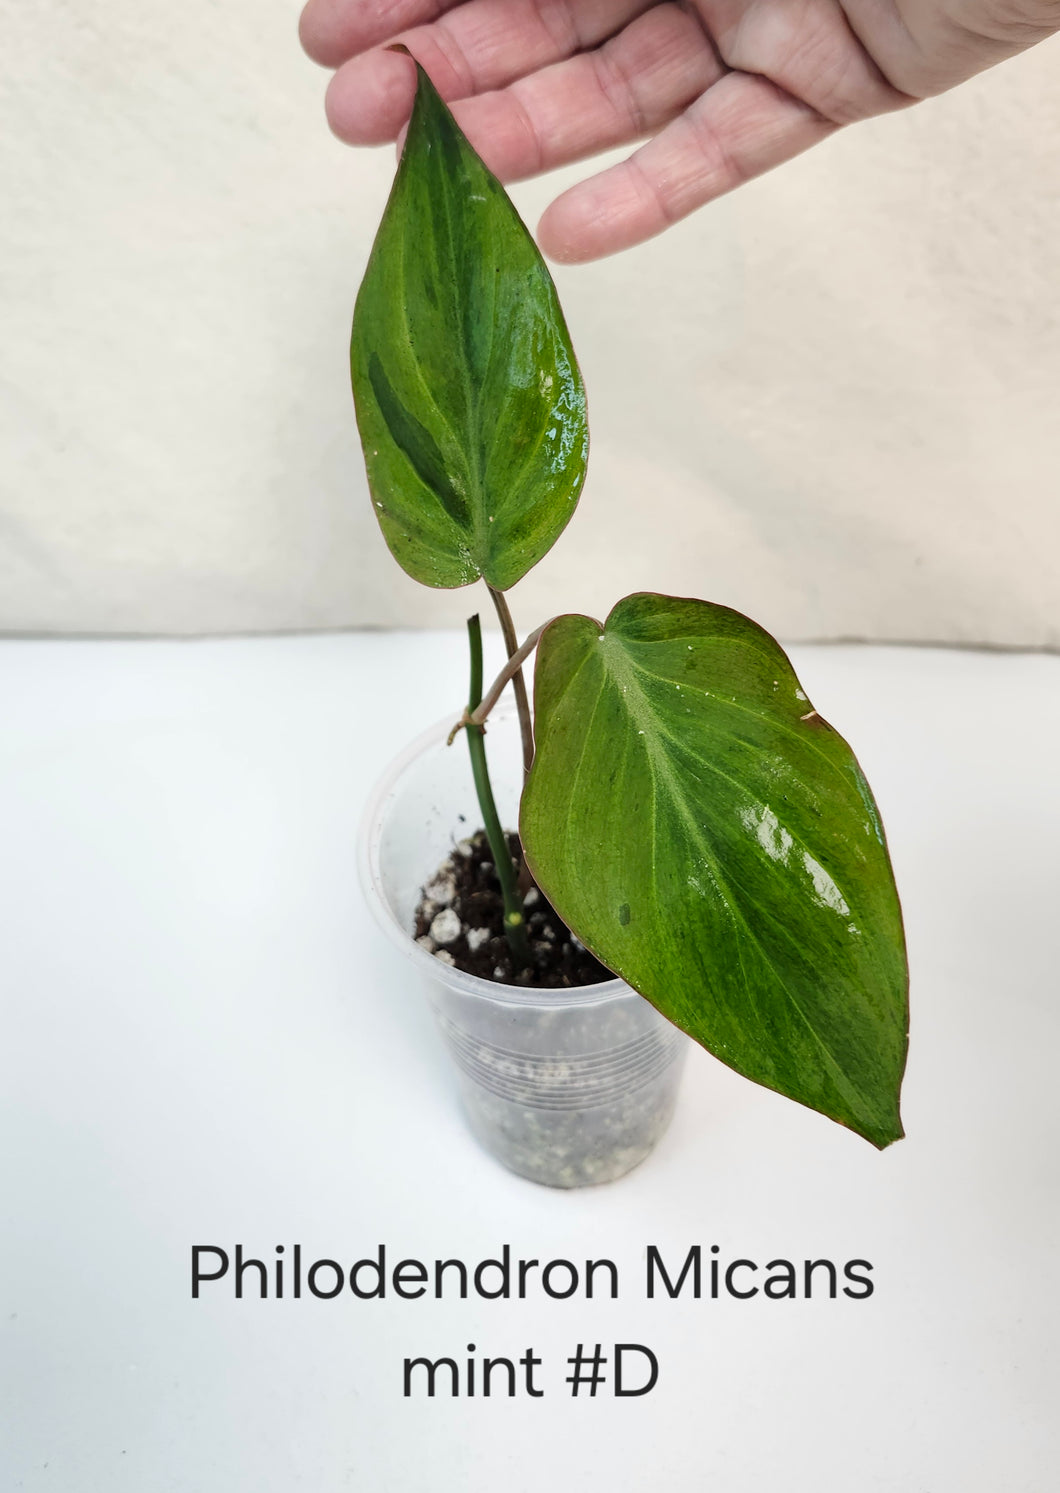 Philodendron Mican mint #D